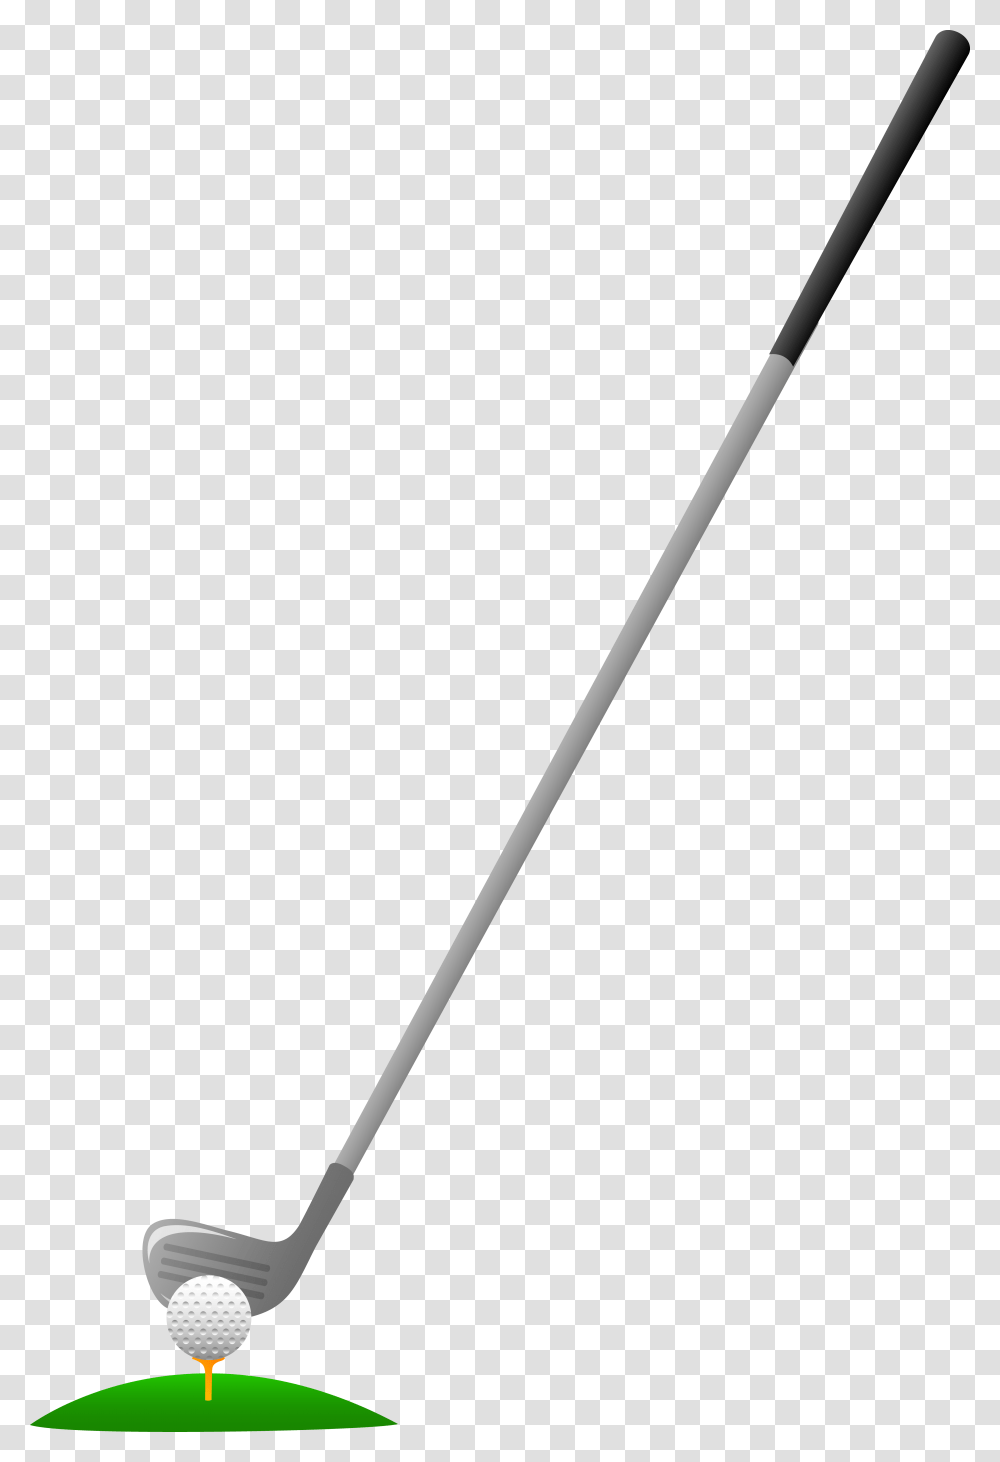 Golf Club Golf Bat And Ball, Weapon, Weaponry, Spear Transparent Png